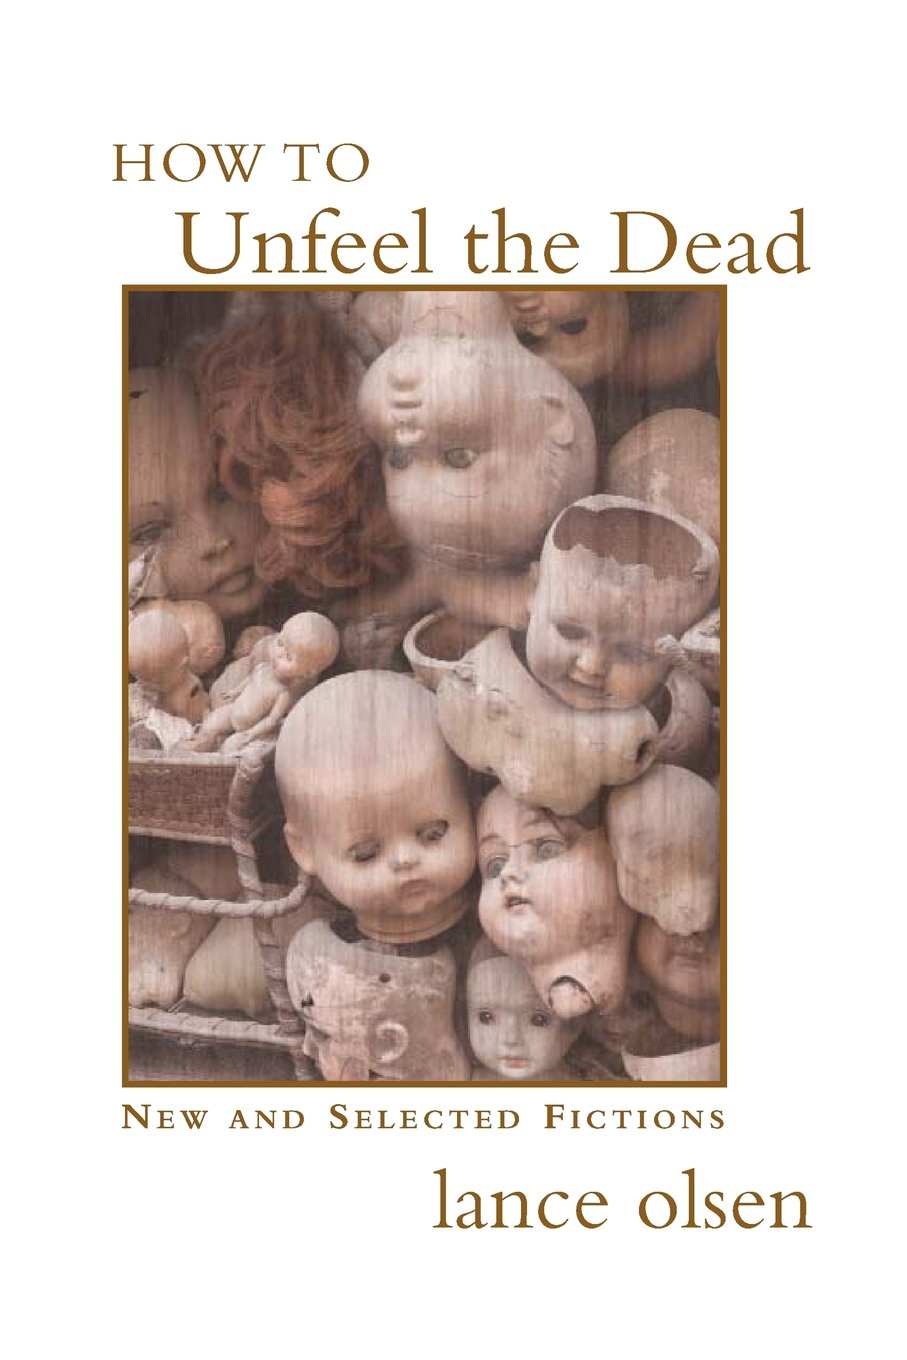 How to Unfeel the Dead: New and Selected Fictions by Lance Olsen